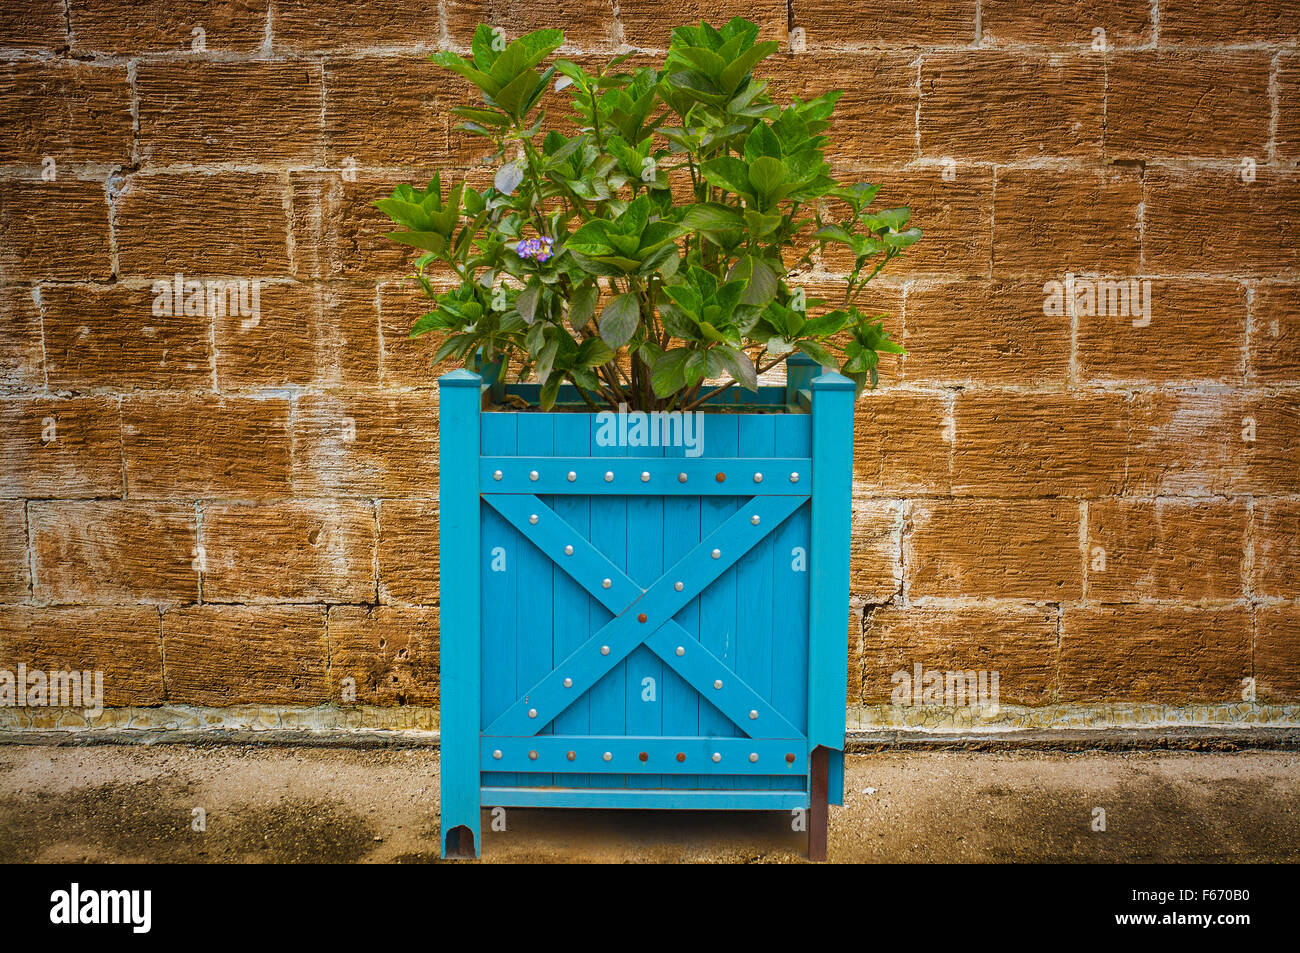 outdoor plant isolated on a wall background Stock Photo